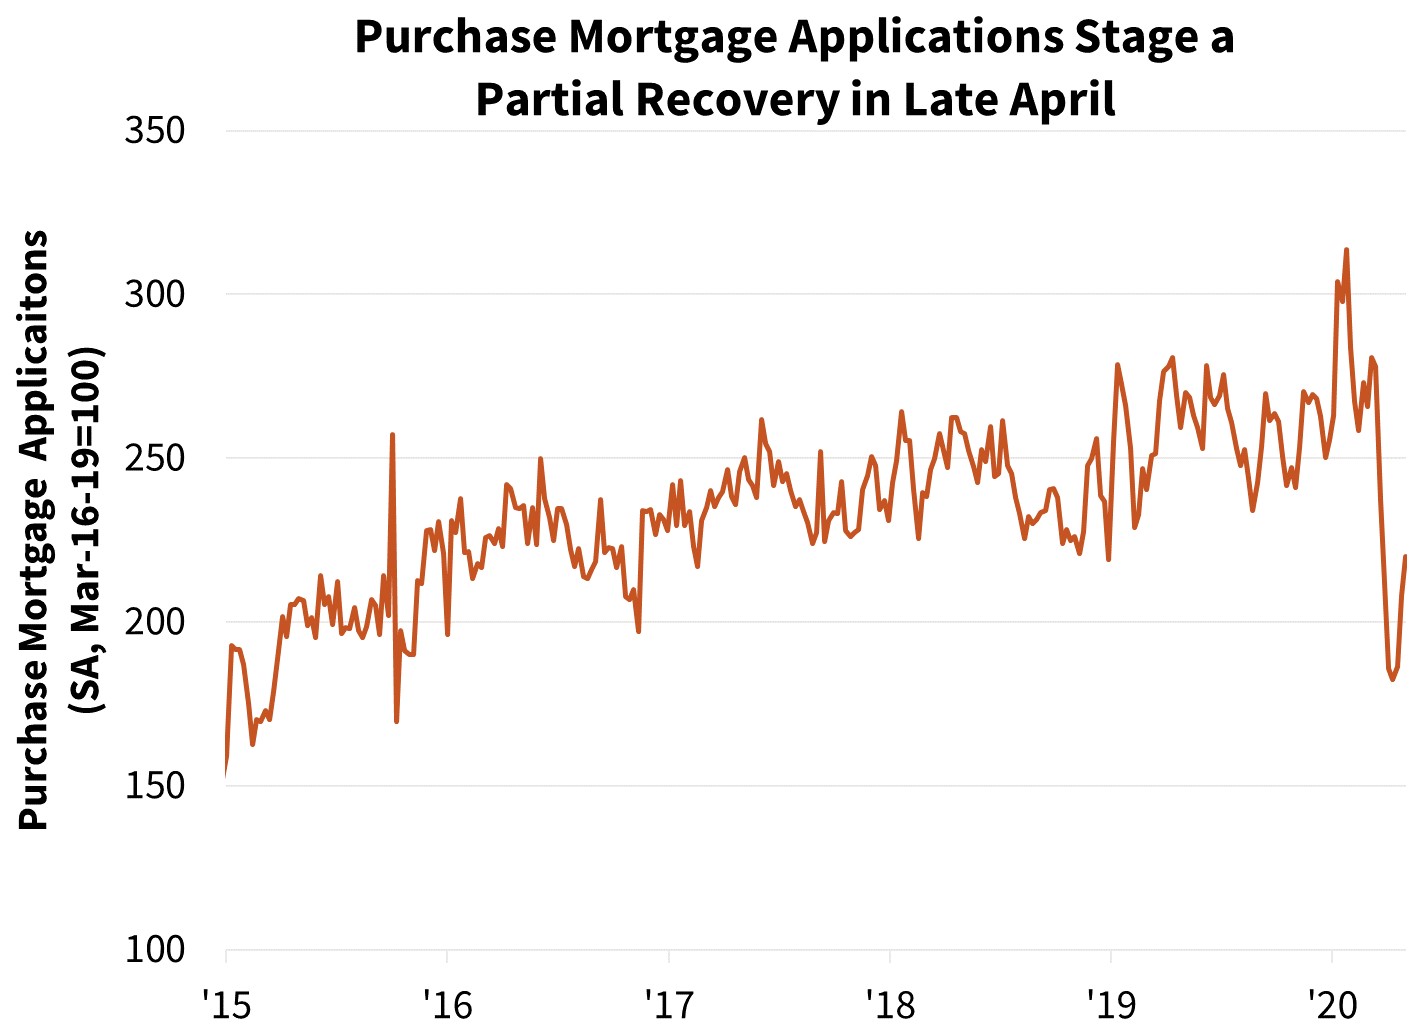  Purchase Mortgage Applications Stage a Partial Recovery in Late April 